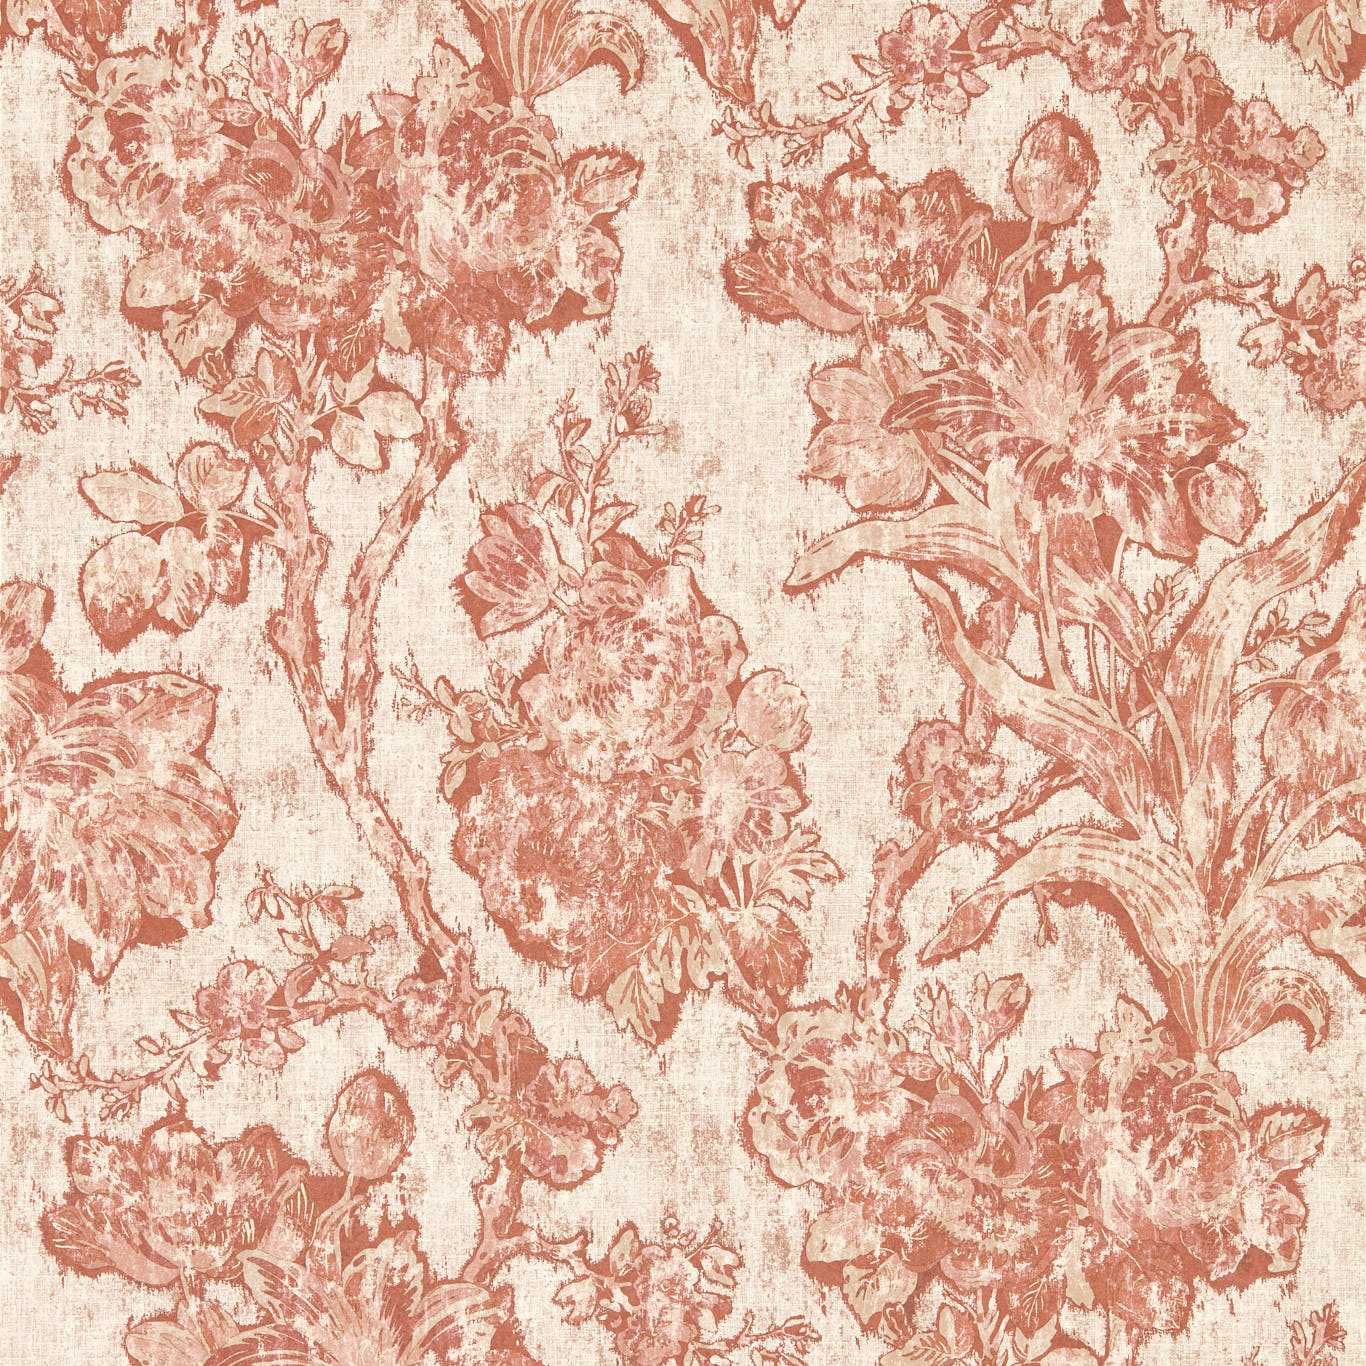 Fringed Tulip Toile Putty Wallpaper DGDW217324 by Sanderson